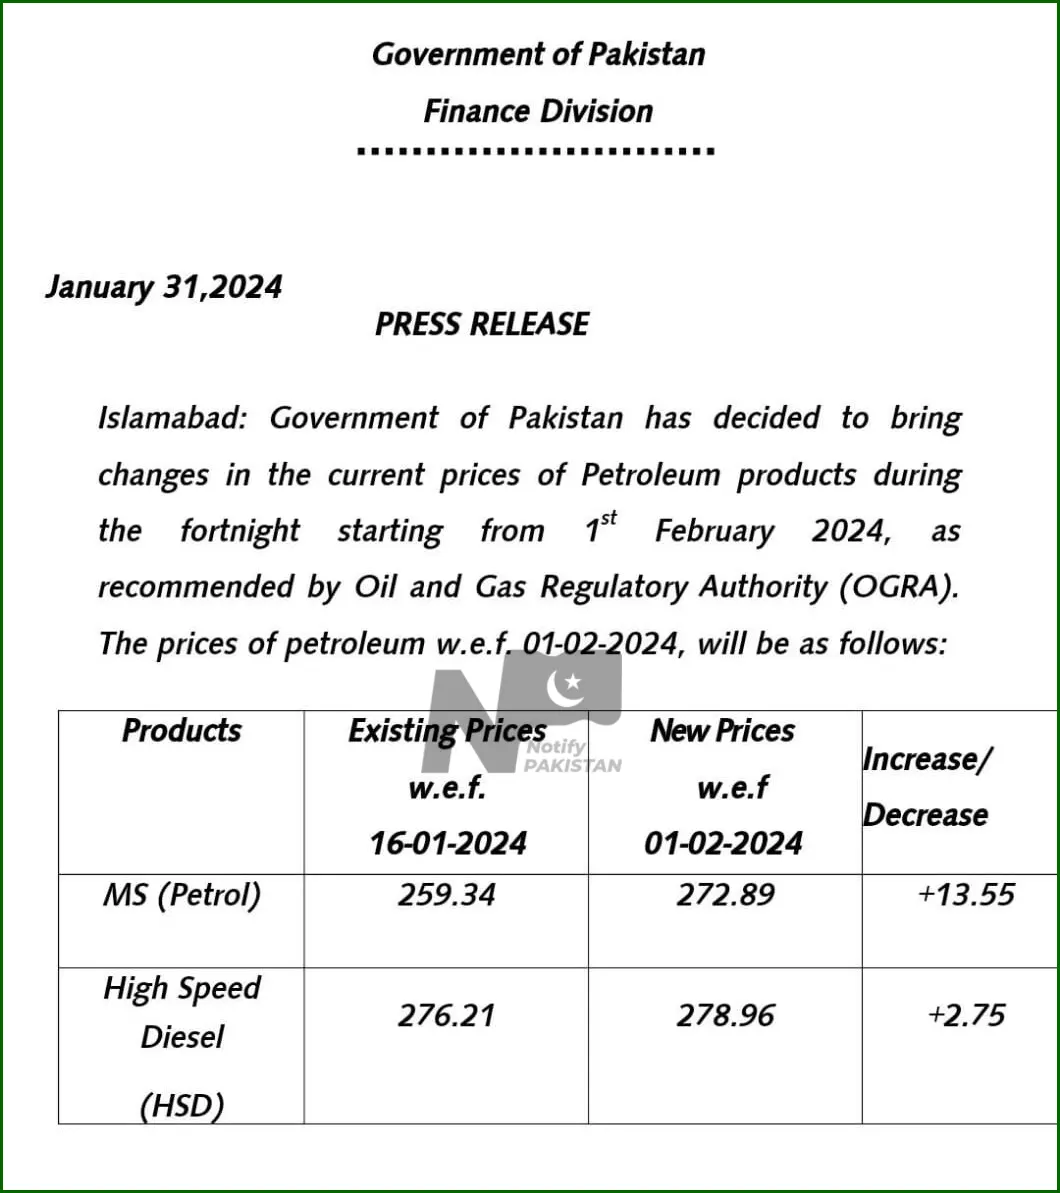 Check Petrol & Diesel Prices on 1st February in Pakistan